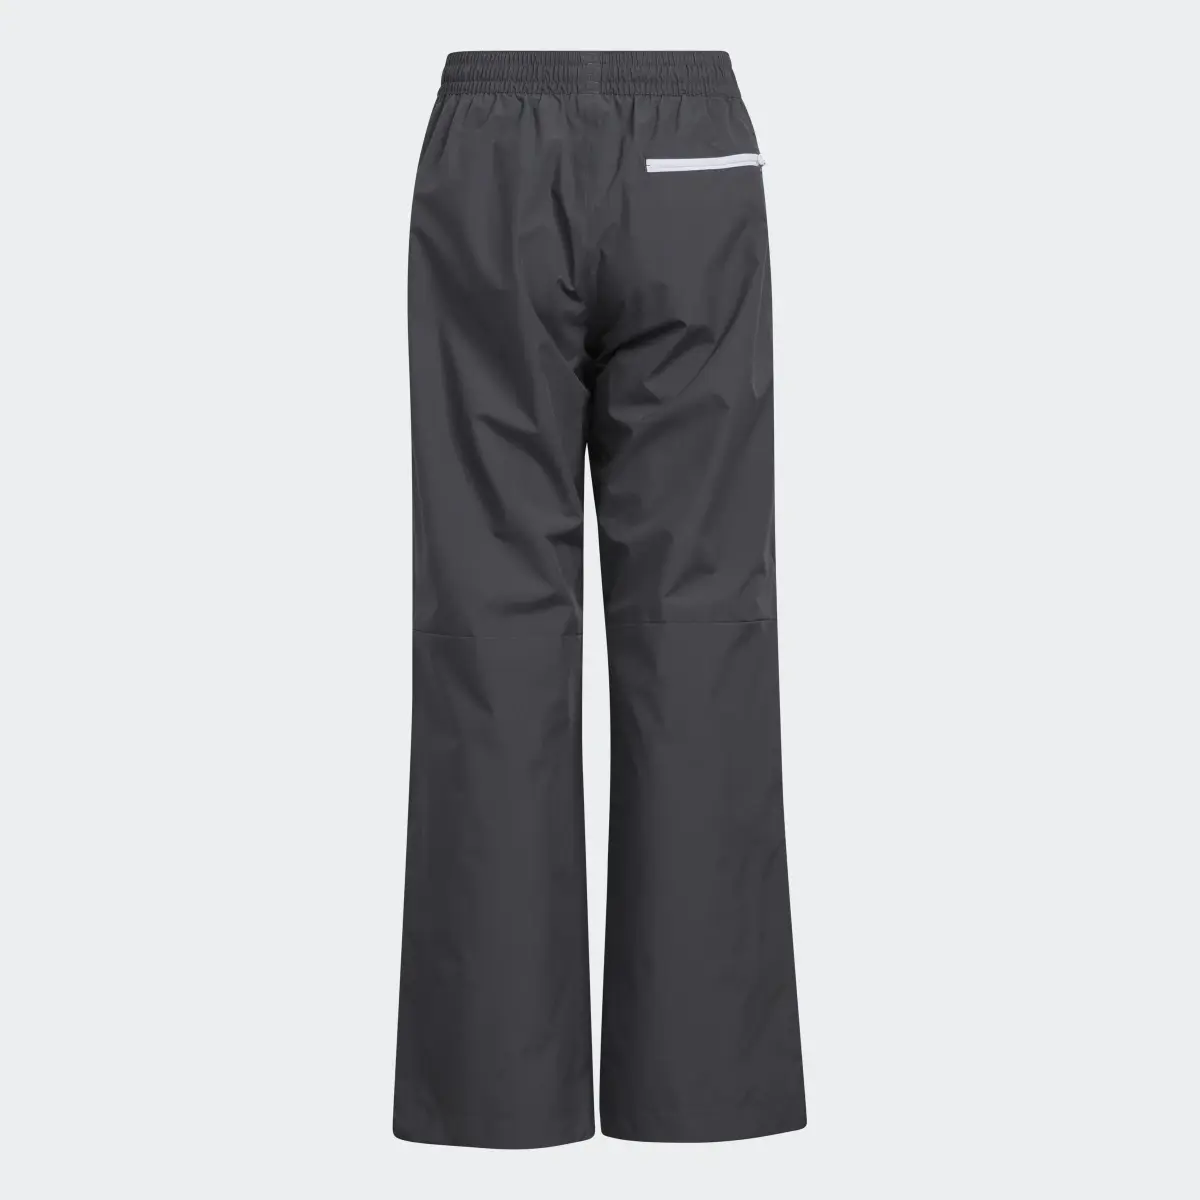 Adidas Provisional Golf Trousers. 2